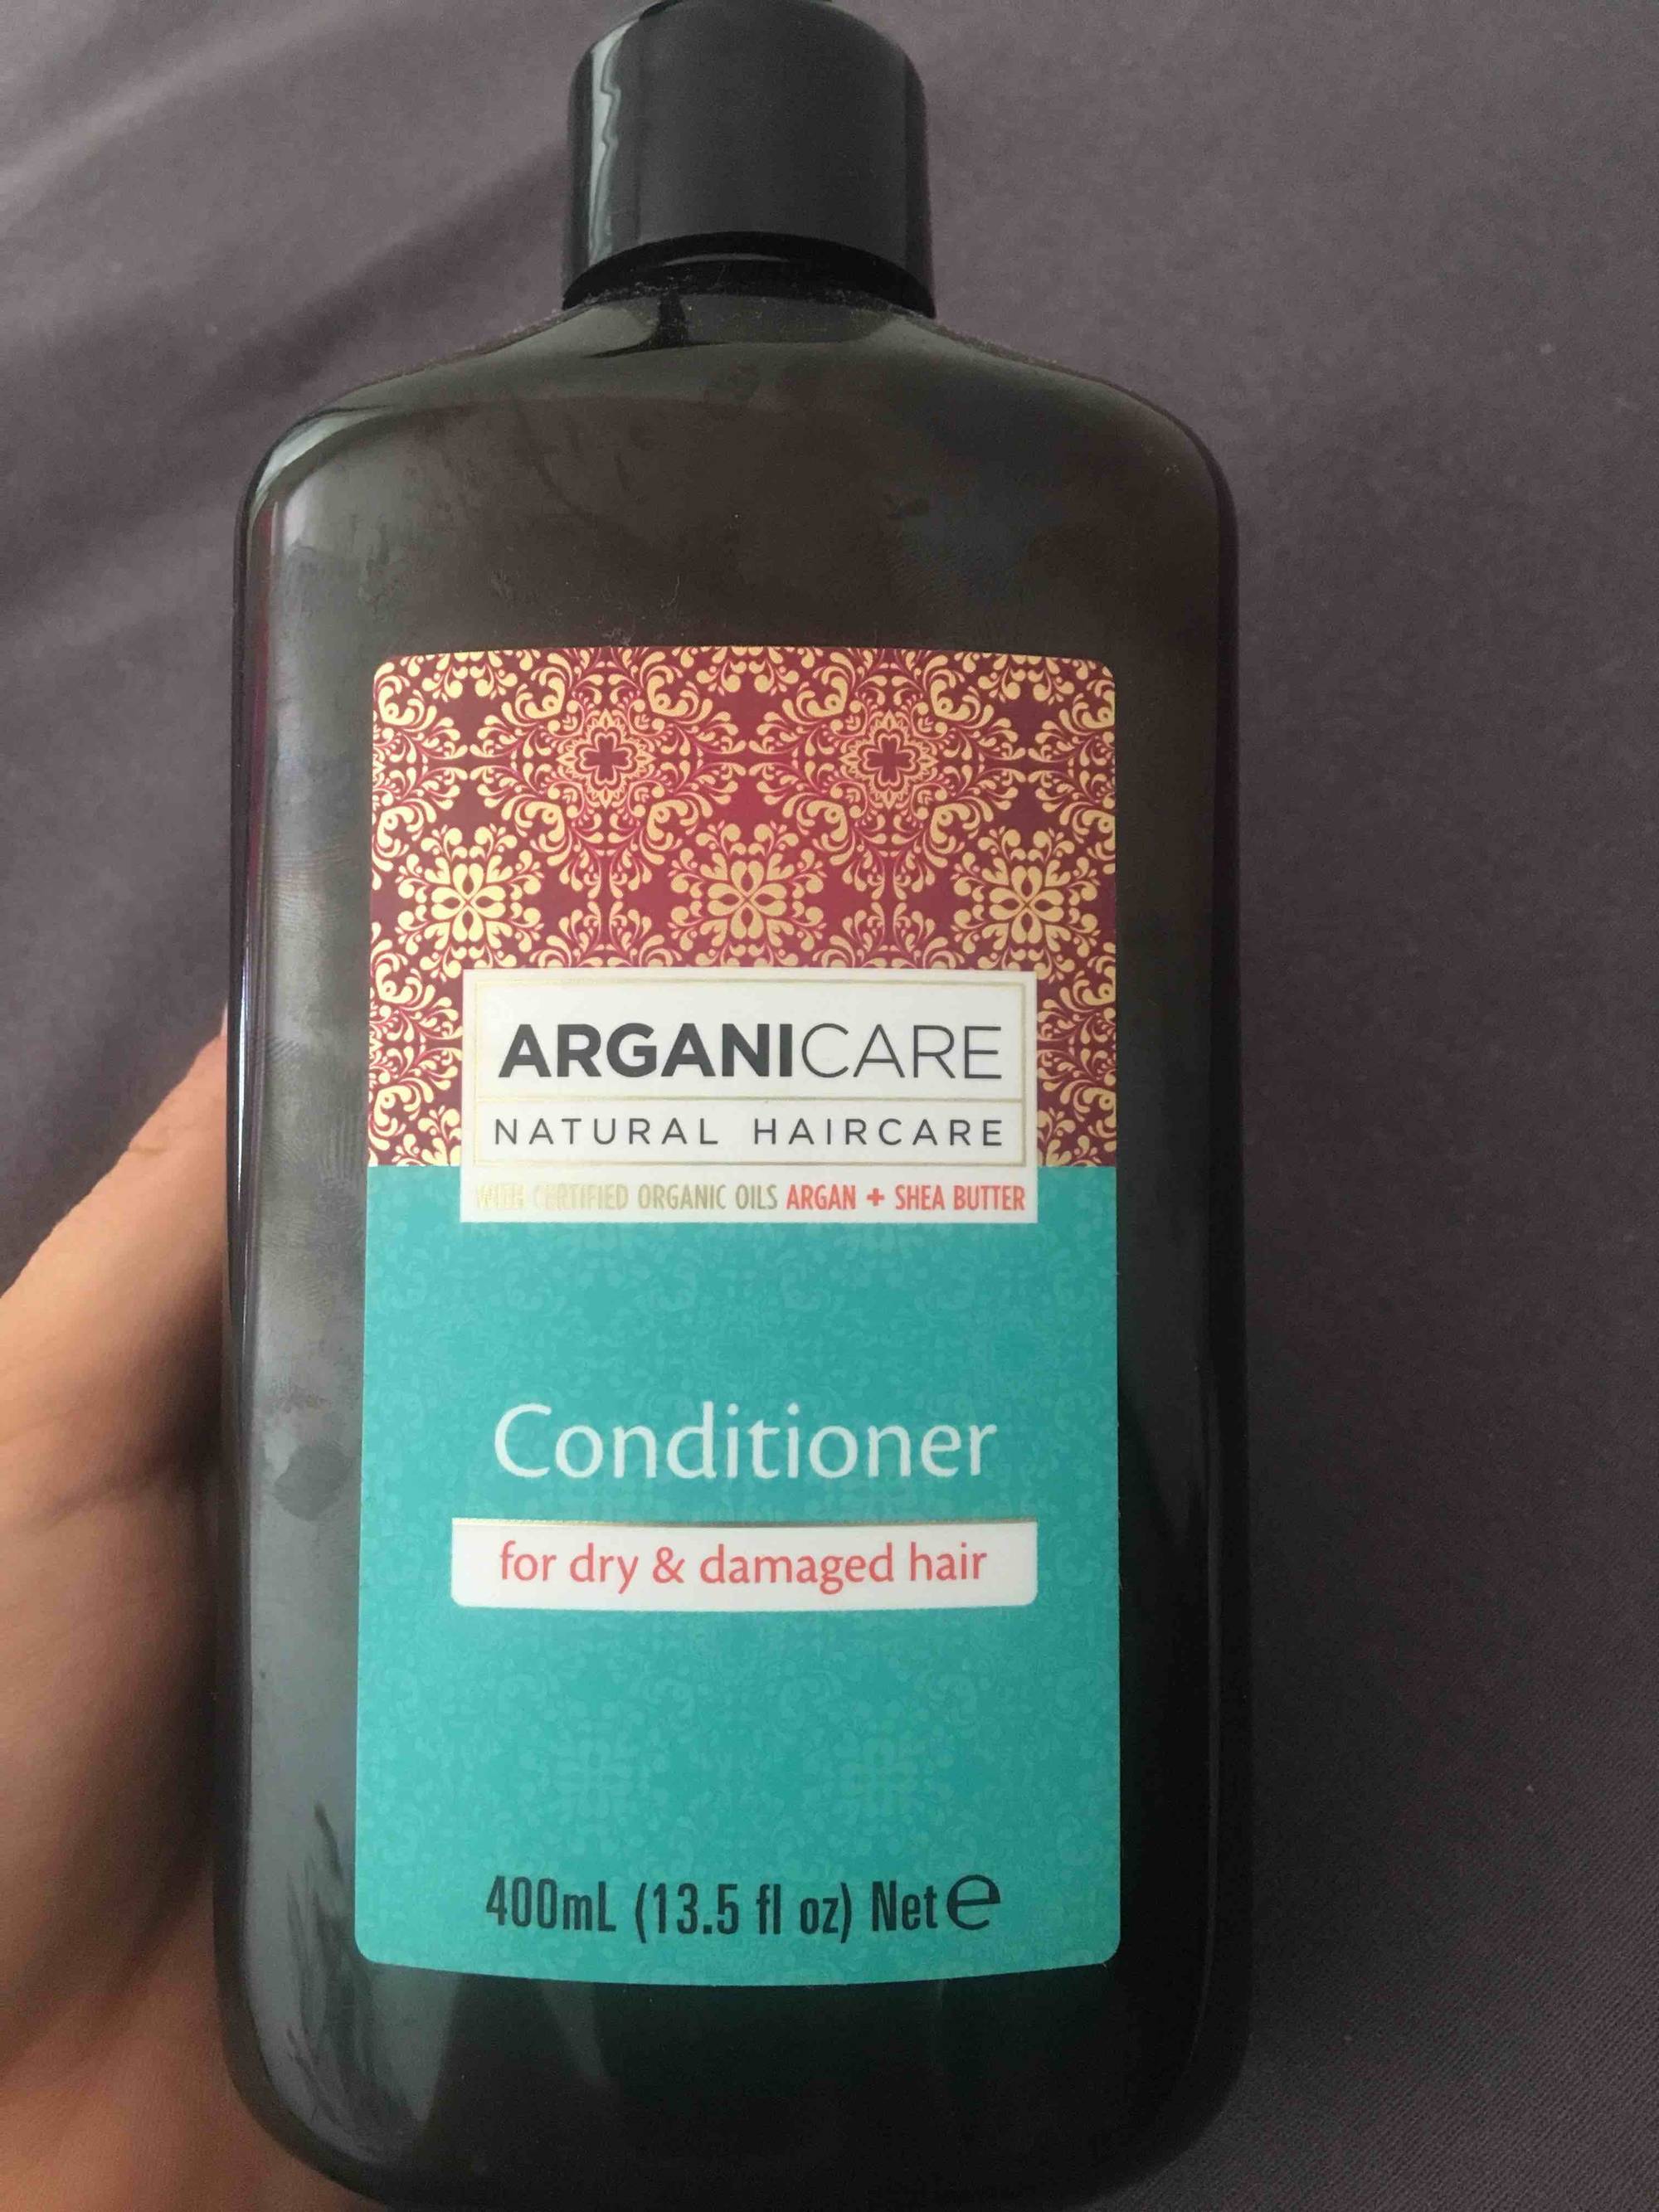 ARGANICARE - Conditioner for dry & damaged hair